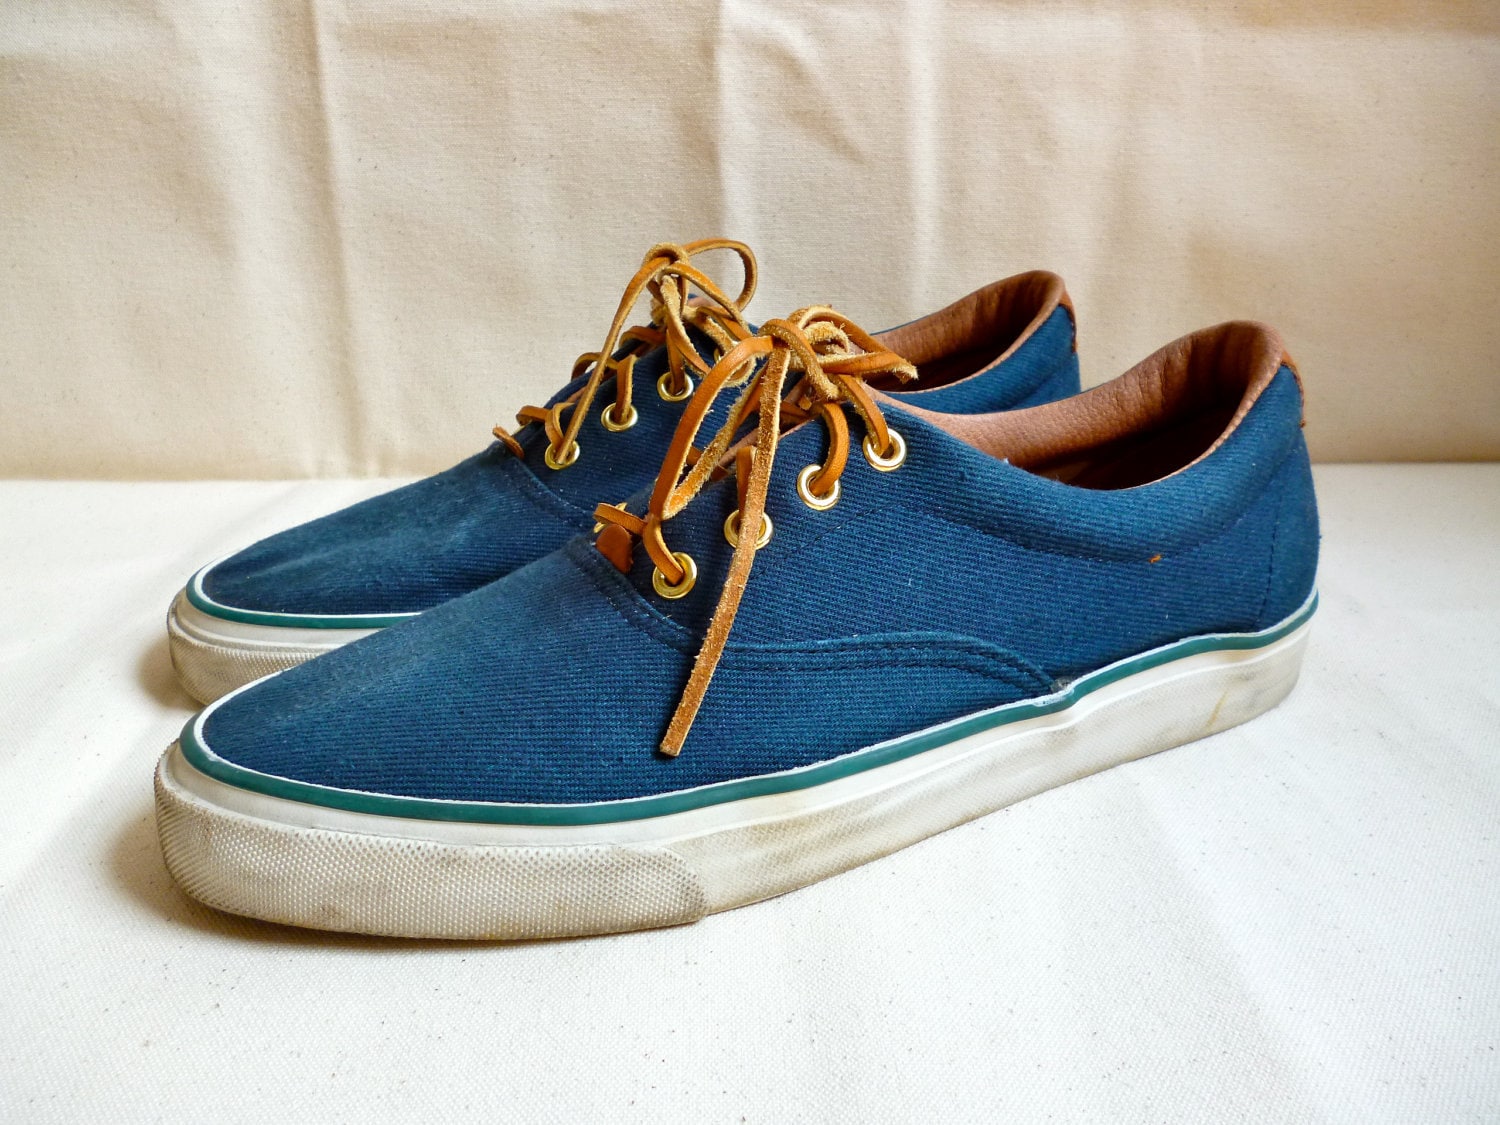 Reserved For James: Vintage G.H. Bass Navy Canvas Deck Shoes